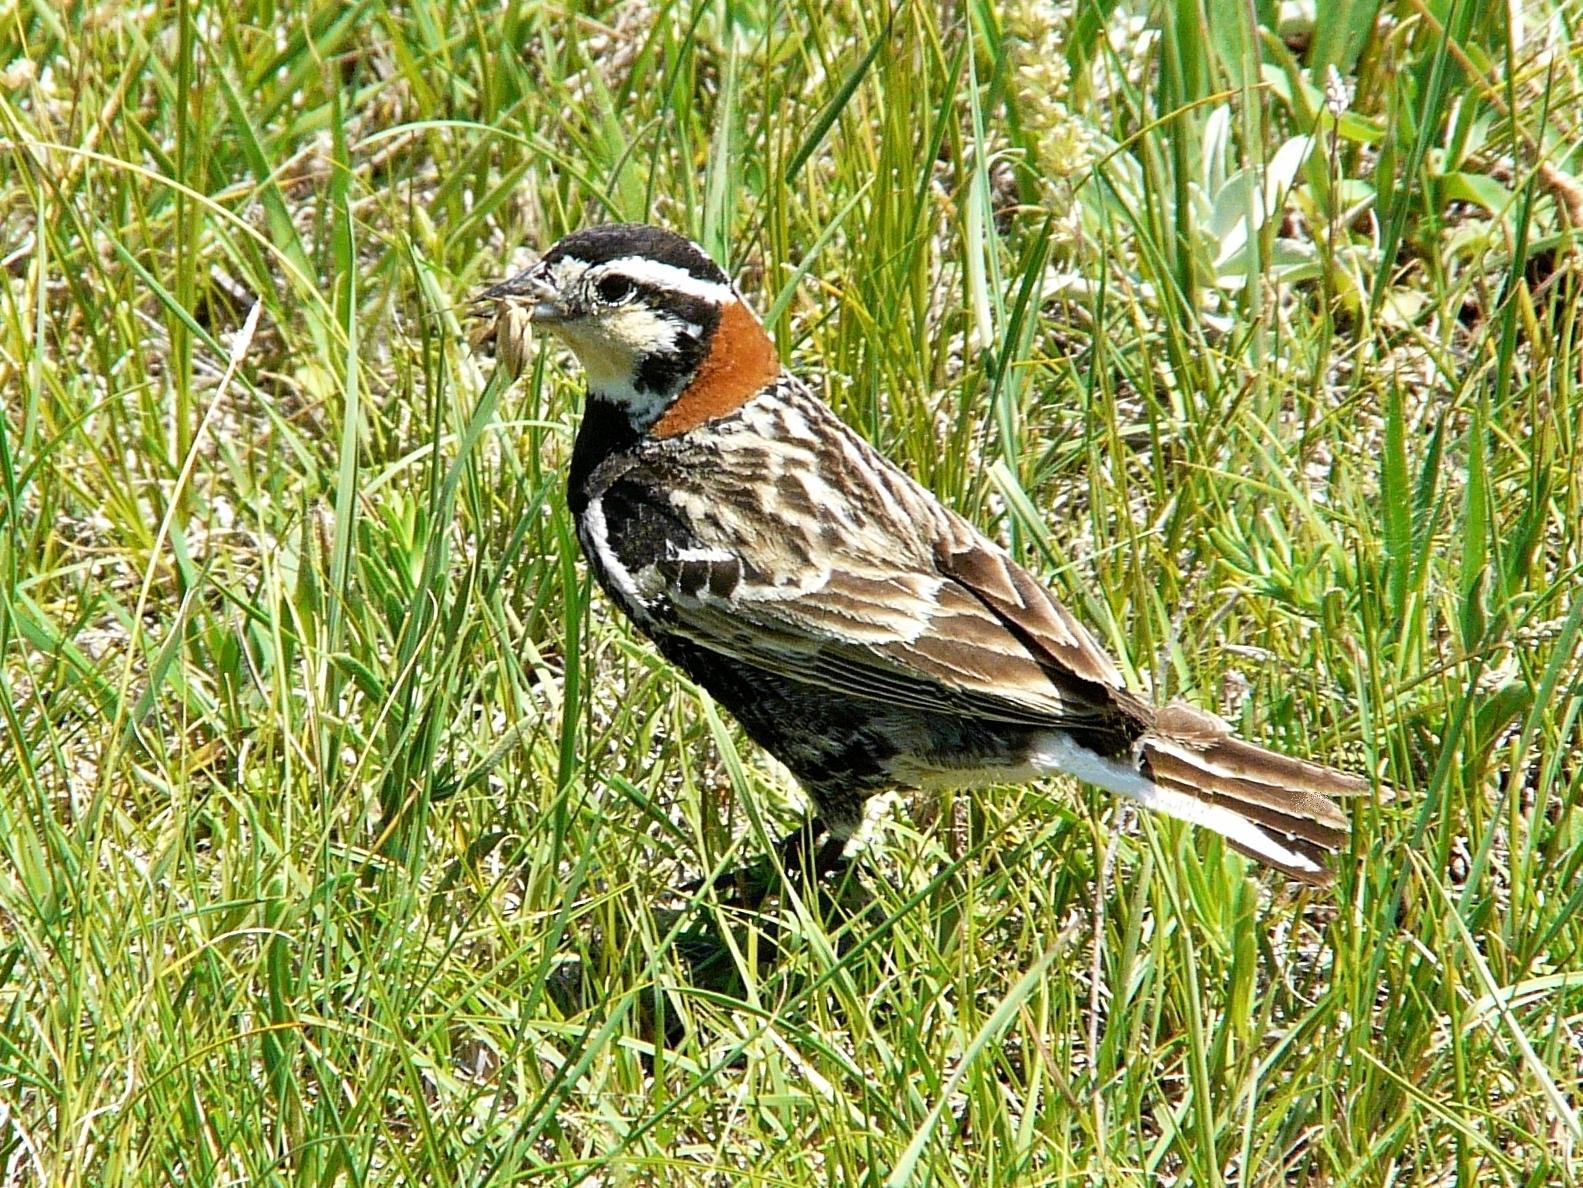 Chestnut-collared Longspur Photo by Bob Neugebauer